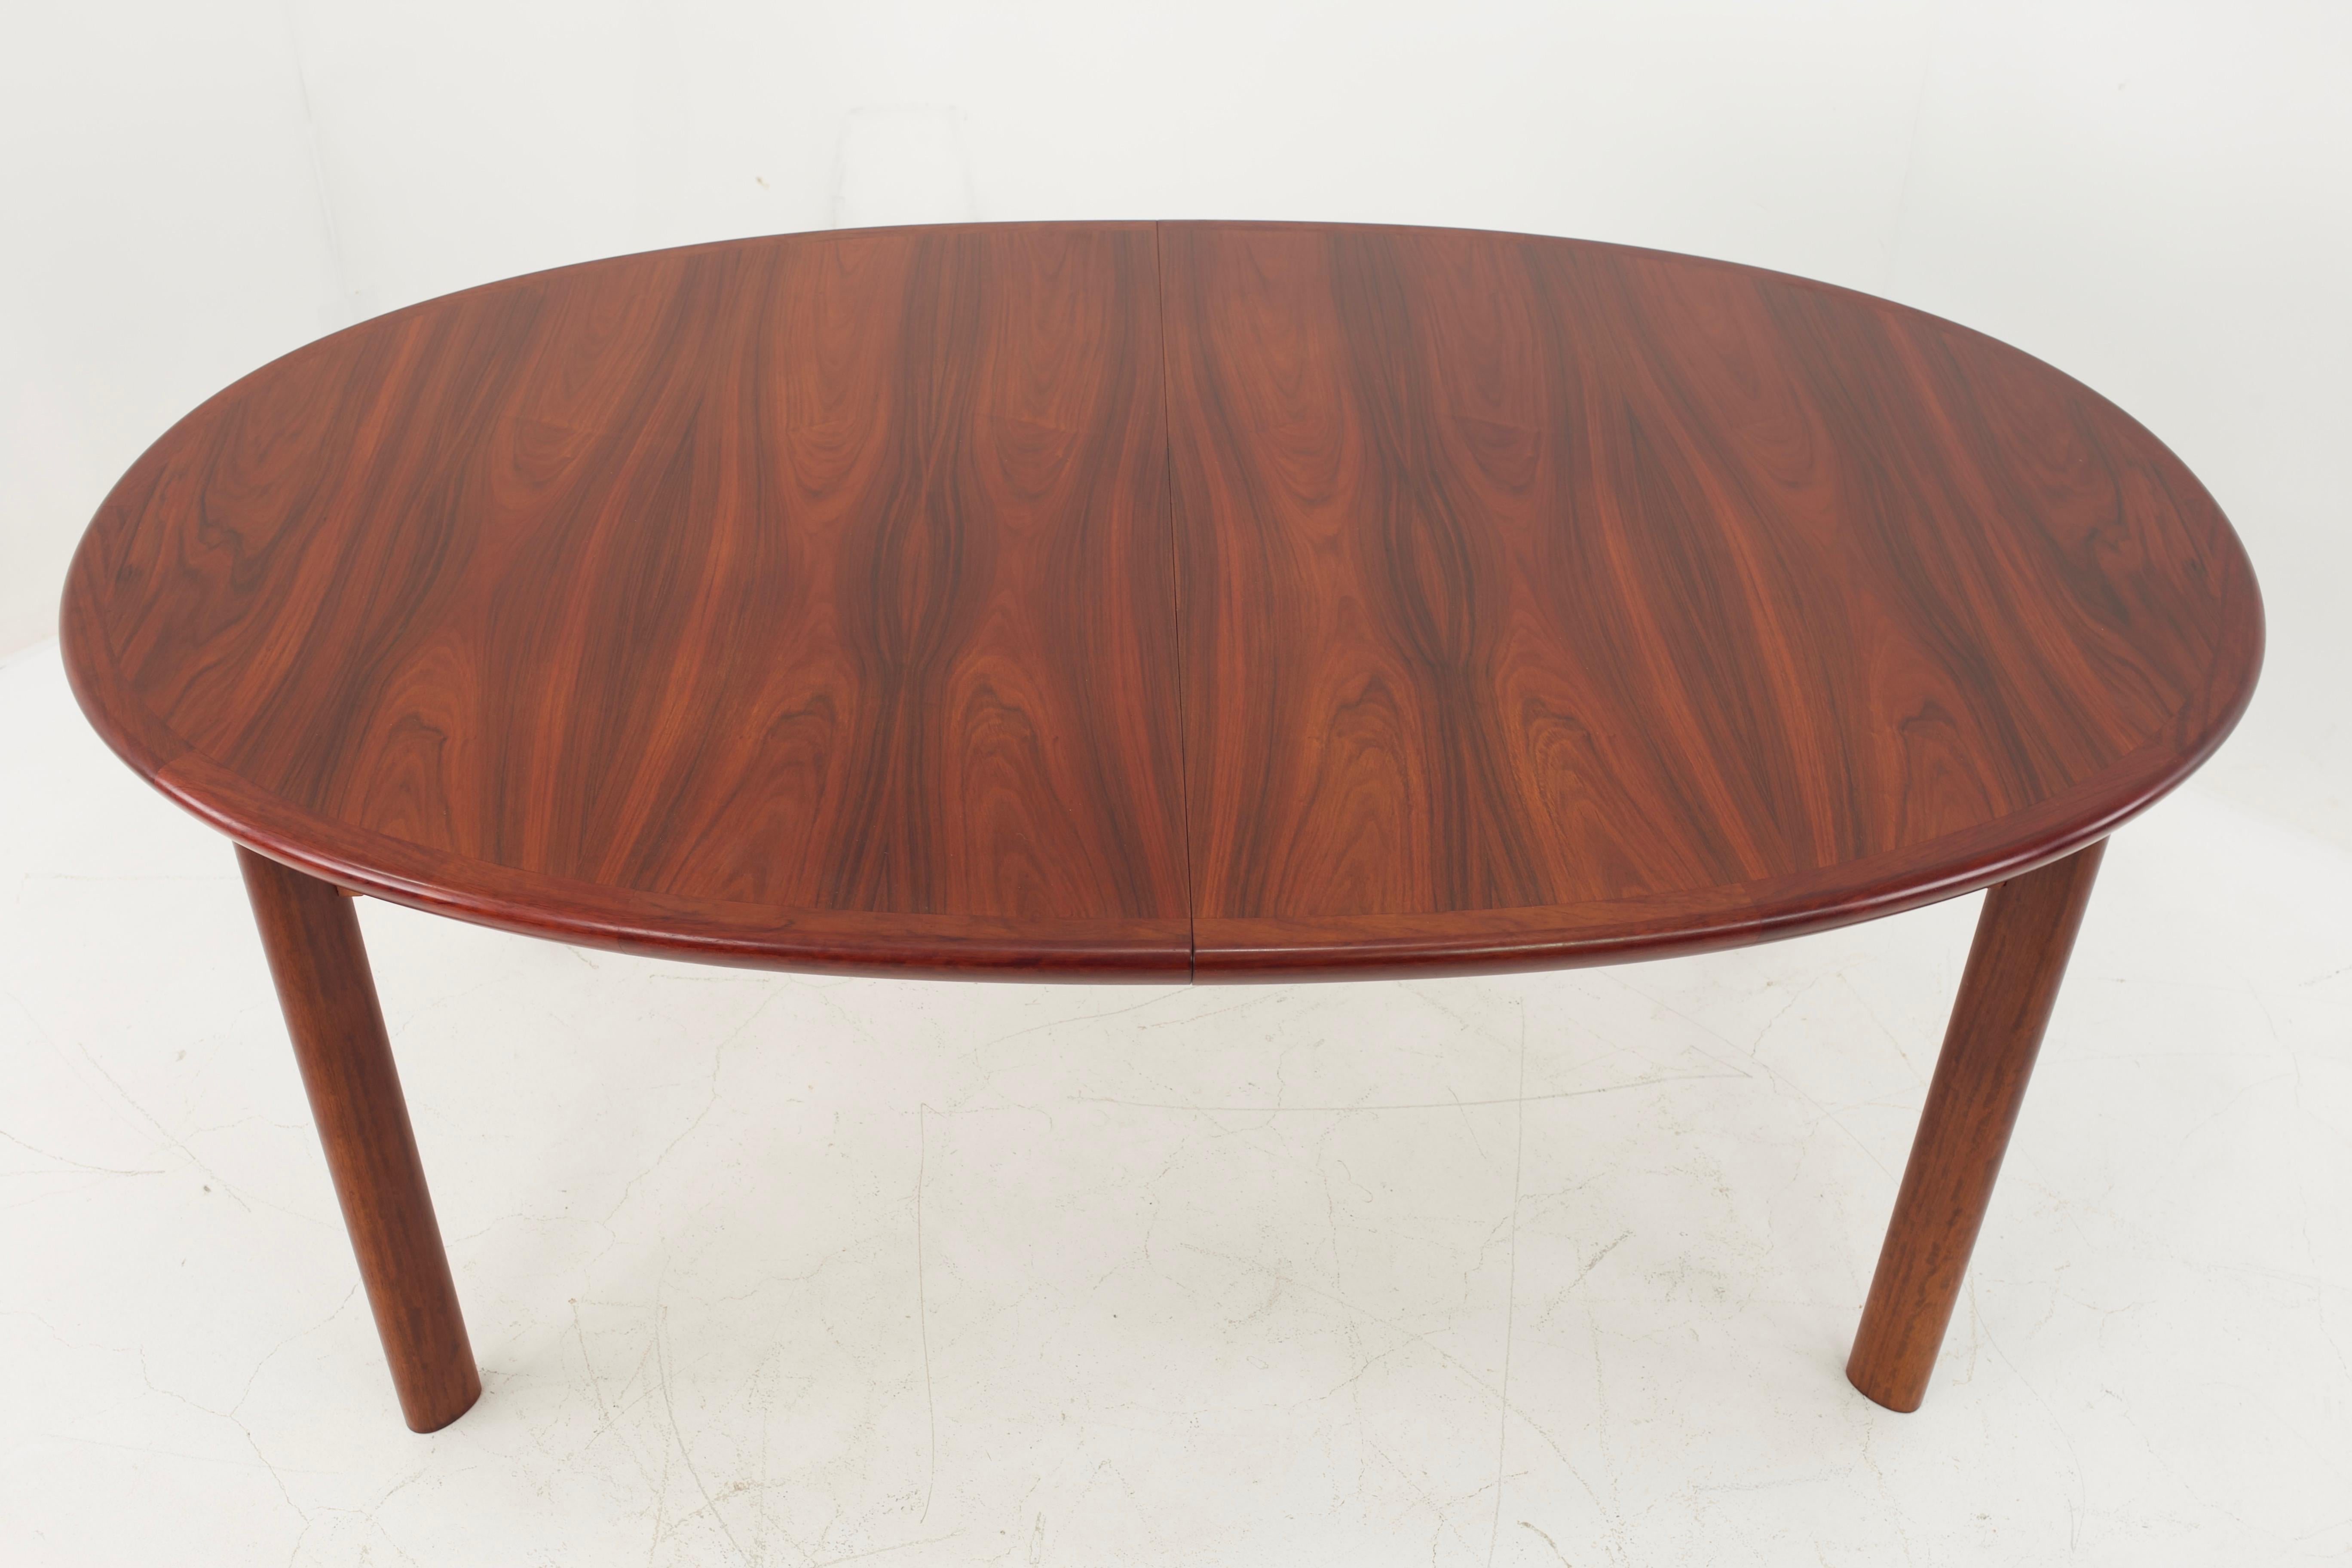 Skovby Mid Century Rosewood Dining Table with 3 Leaves

Table without leafs measures: 68 wide x 43 deep x 29 high with a chair clearance of 27 inches

Each leaf is 19 inches; Width with all three leafs is 125 inches 

This price includes